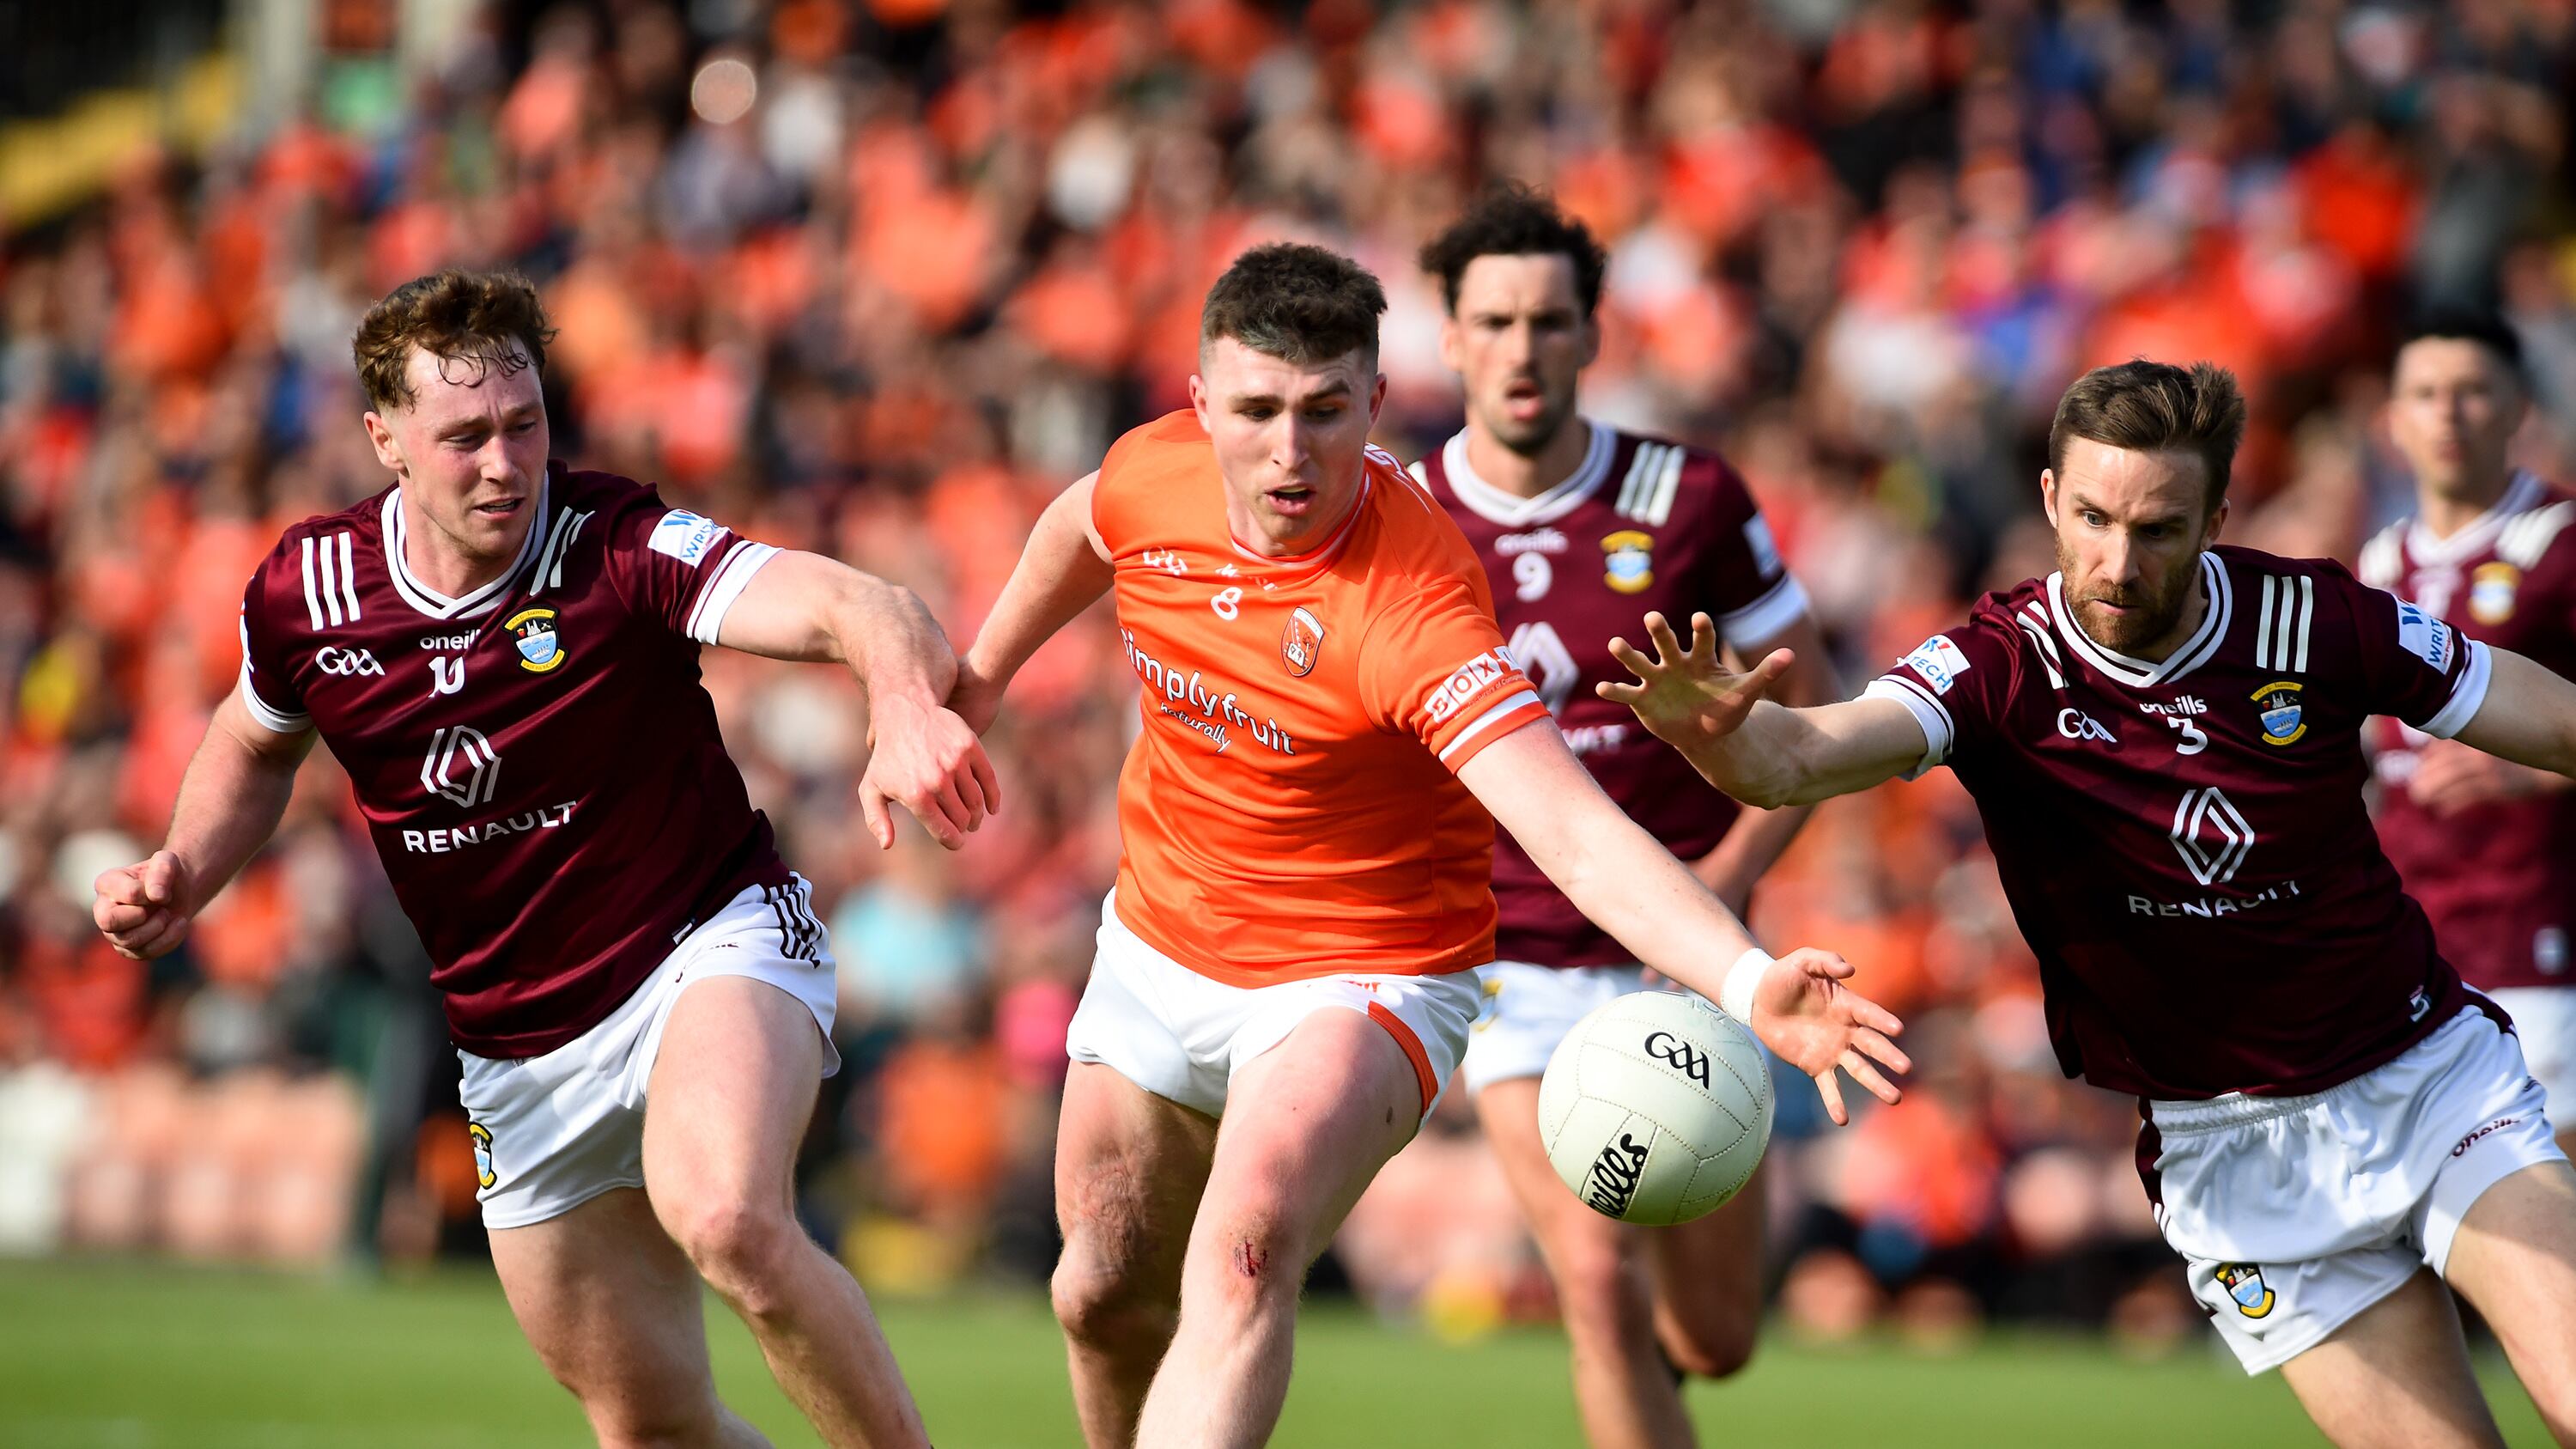 Armagh's Tiernan Kelly on the attack with Westmeath's Jonathan Lynam and Kevin Maguire in pursuit. Picture: John Merry